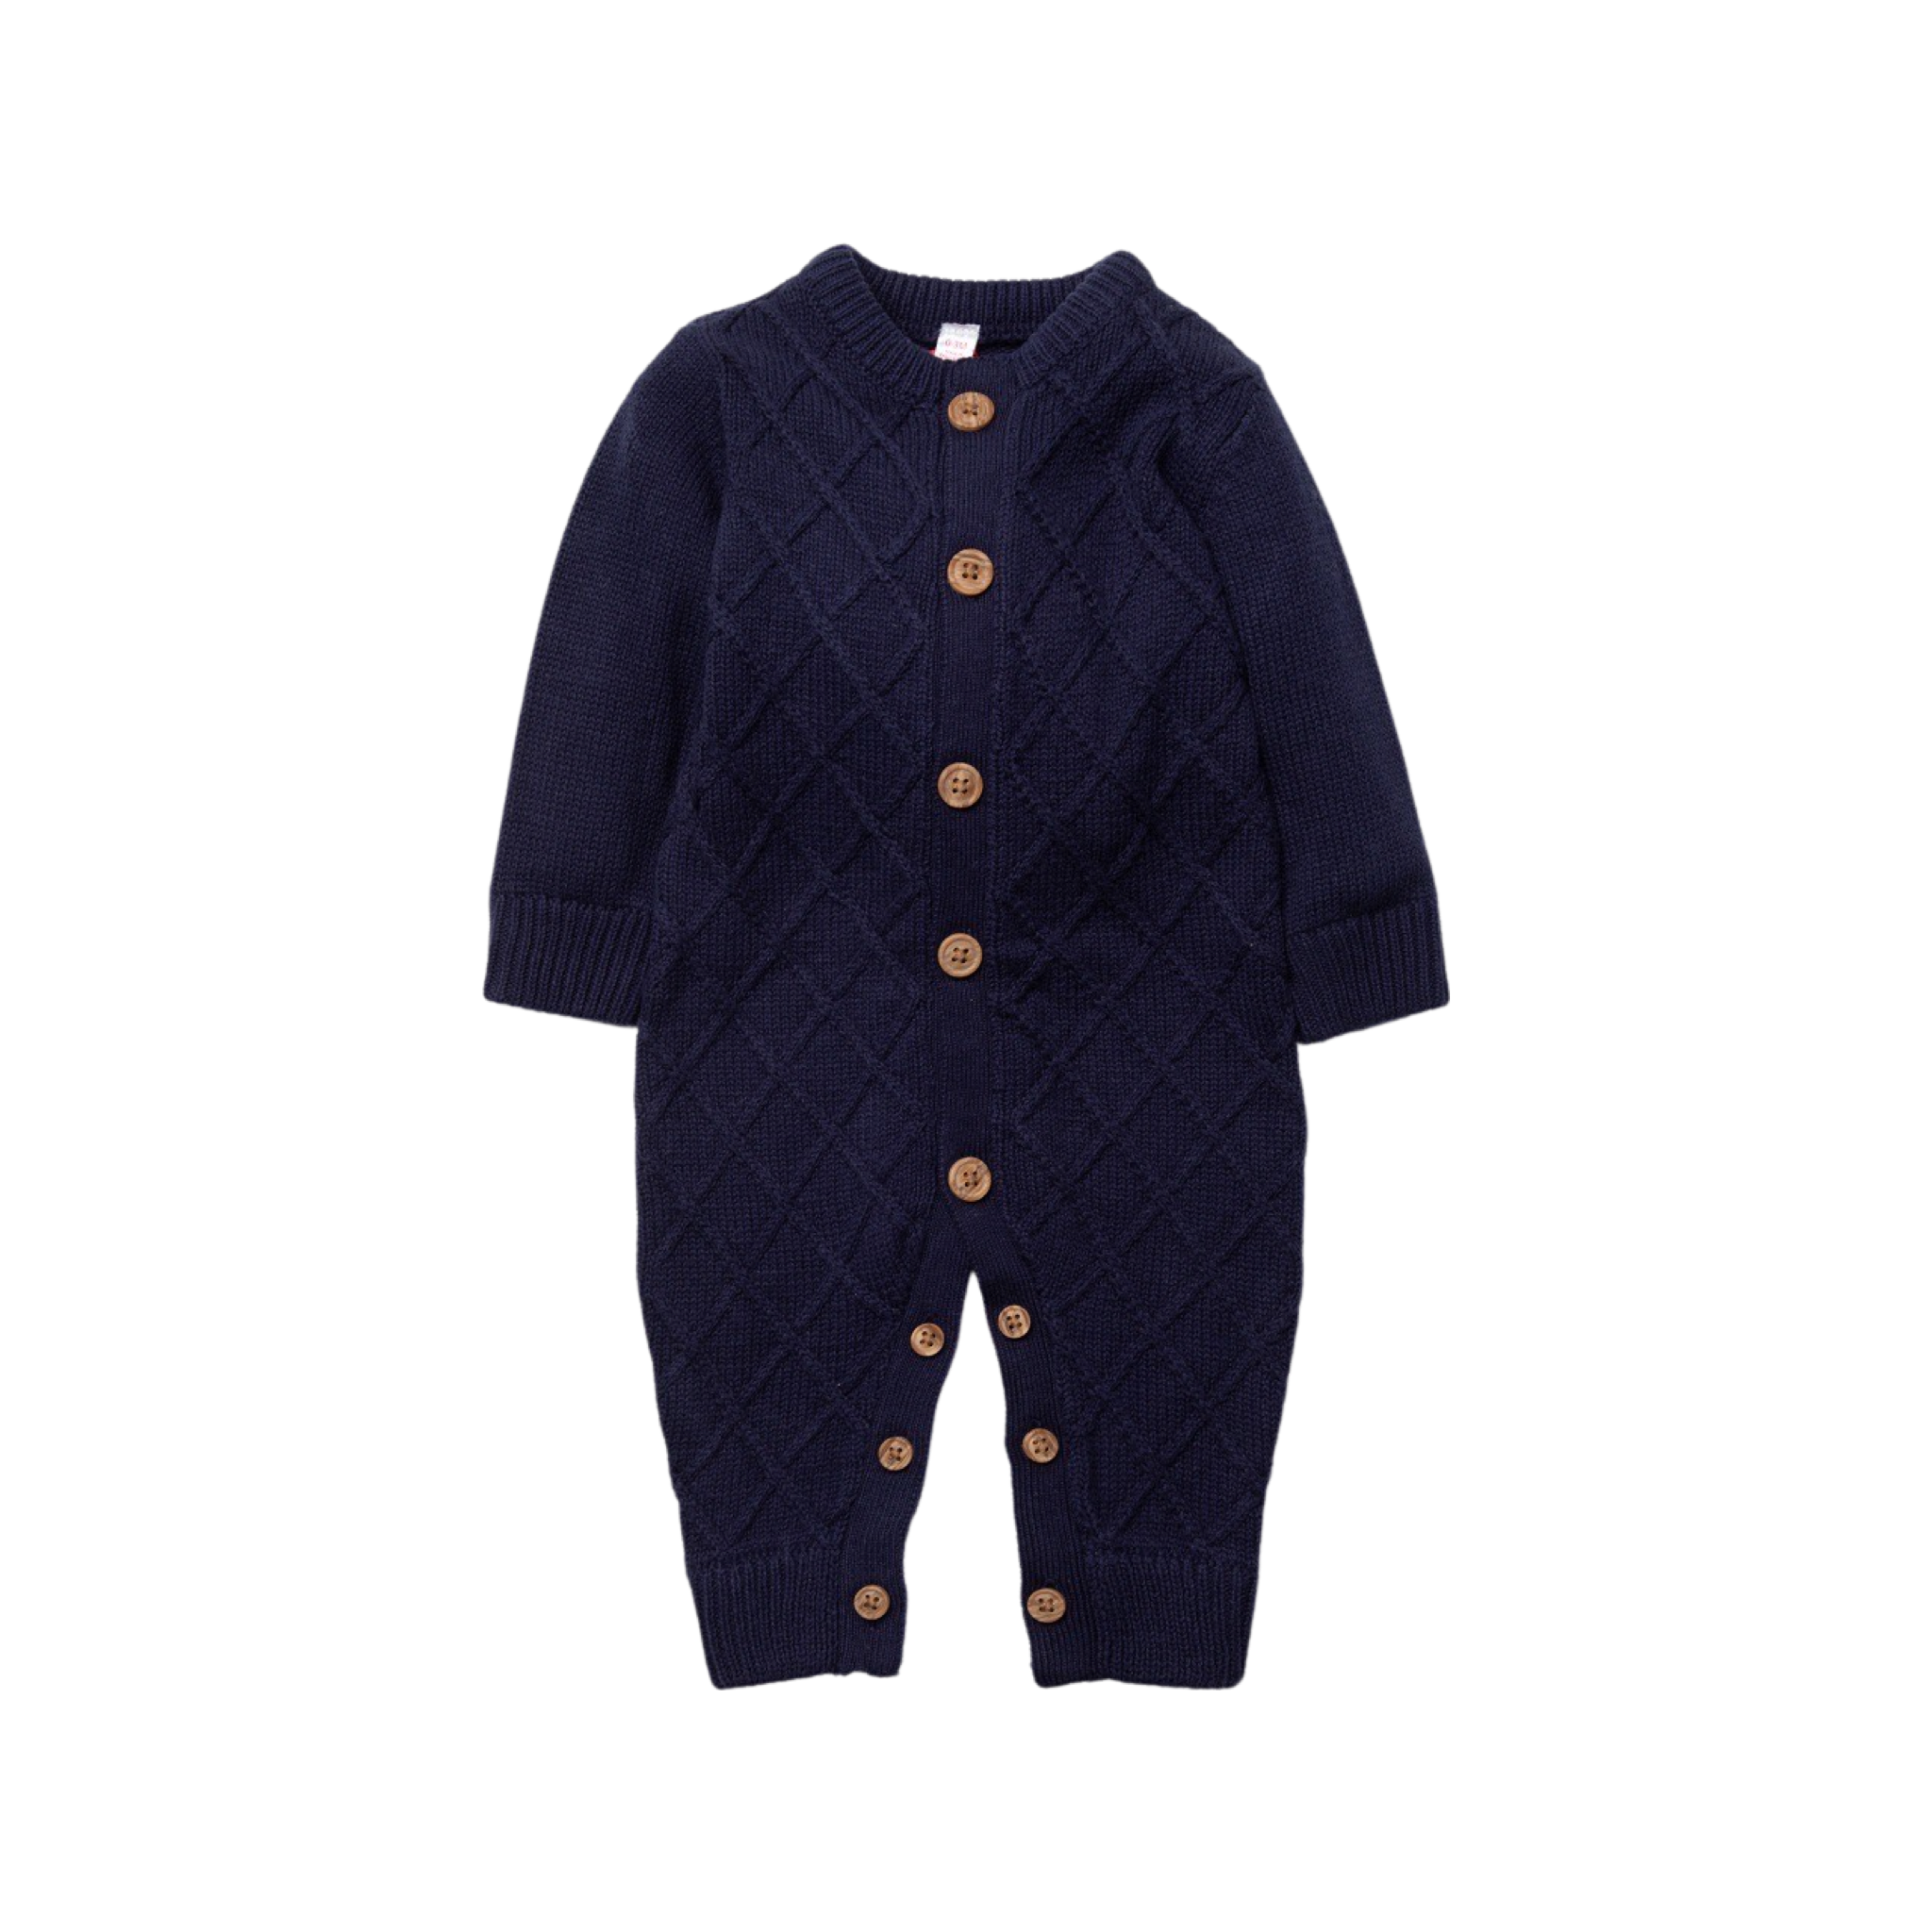 IUNLEASH KNIT BUTTON ROMPERS - その他